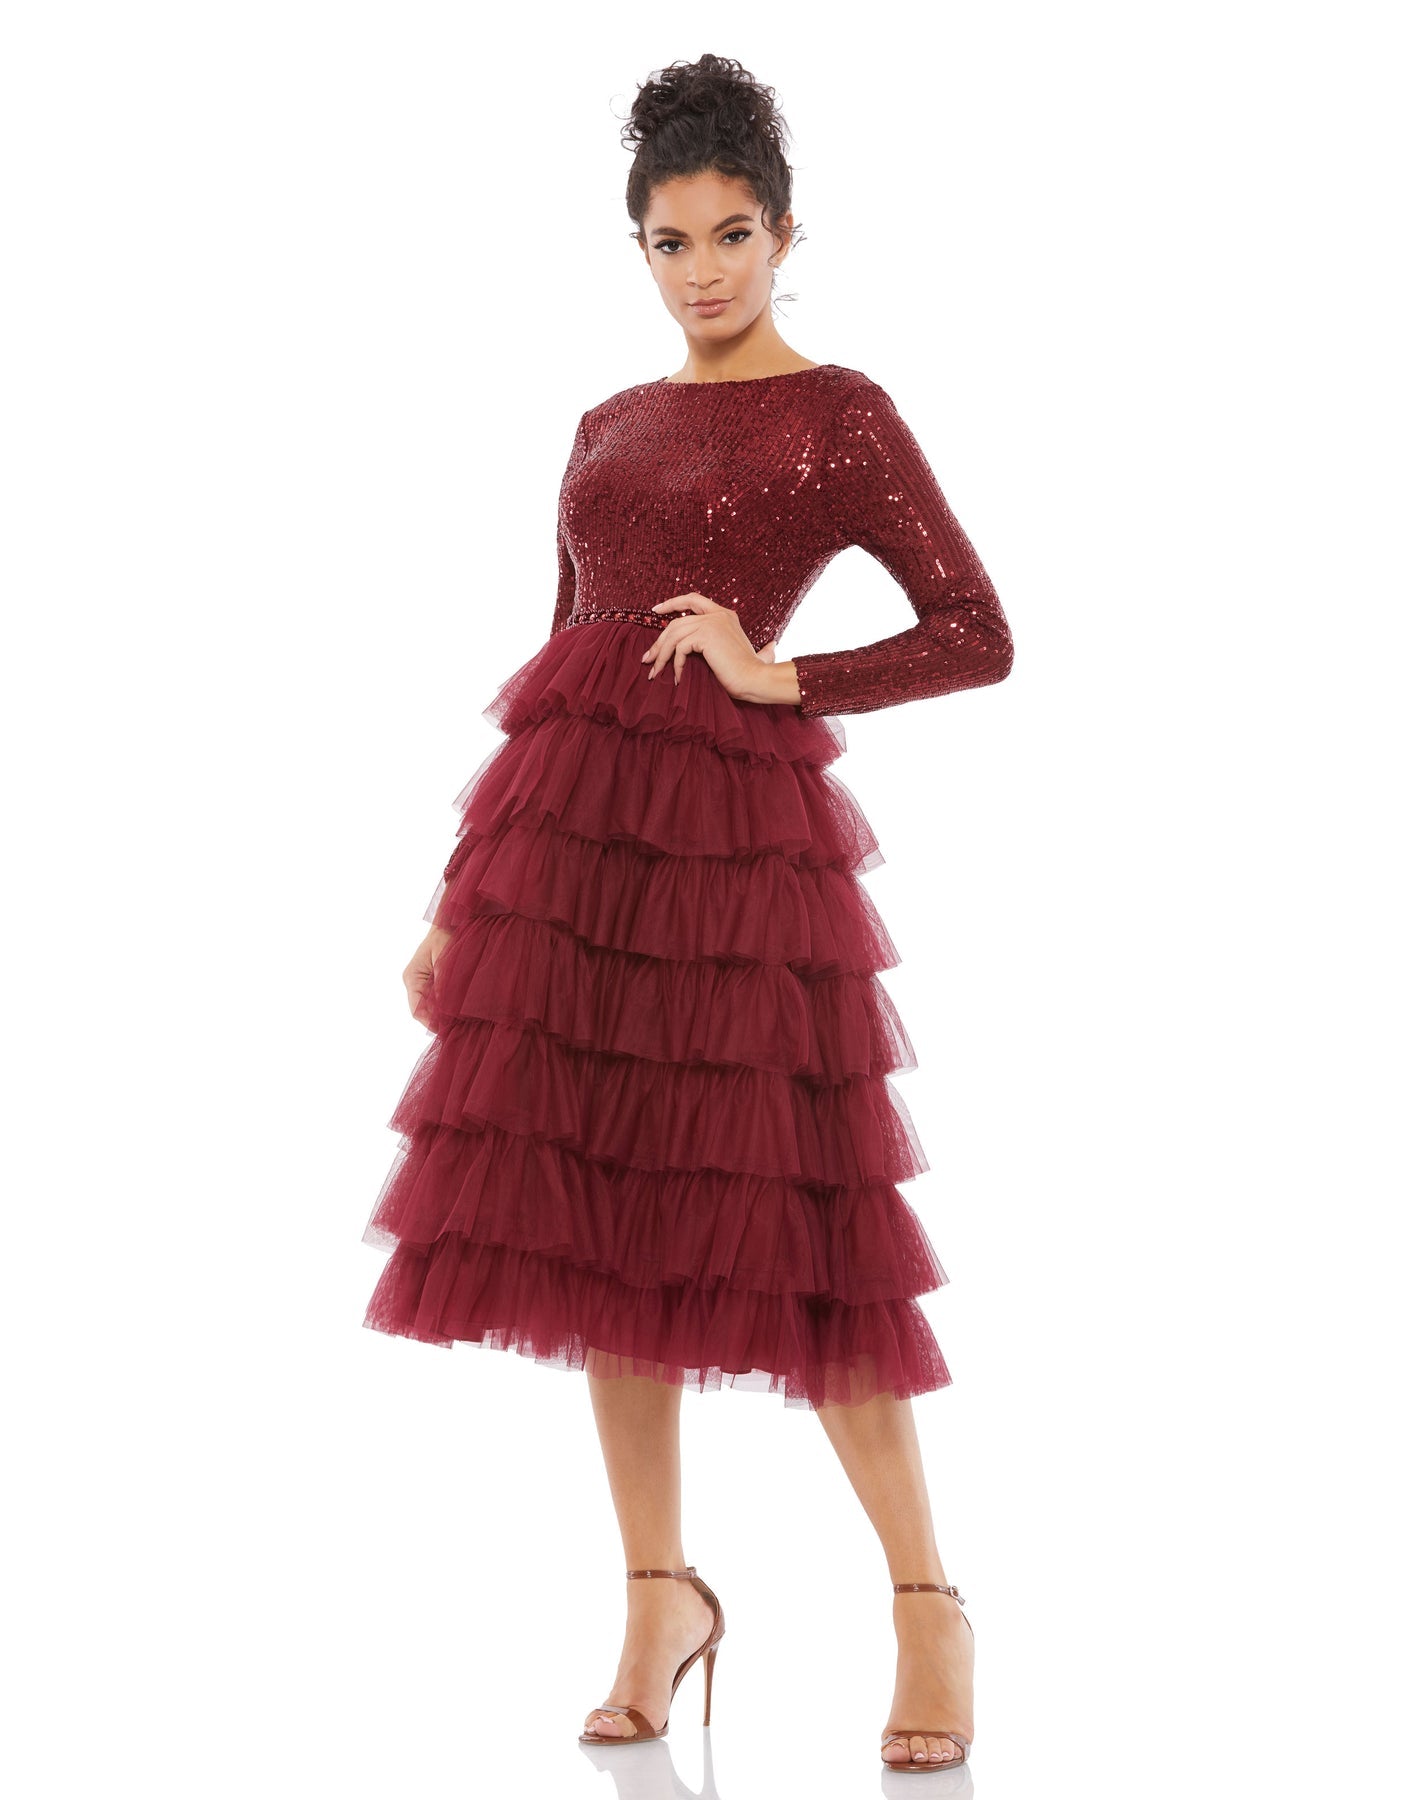 Chic tea-length dress with a sequined bodice, long sleeves, and a round neckline. A-line skirt features black layered tulle, and hand-beaded belt accents the natural waist. Ieena for Mac Duggal Fully Lined Back Zipper 100% Polyester Long Sleeve Cocktail H